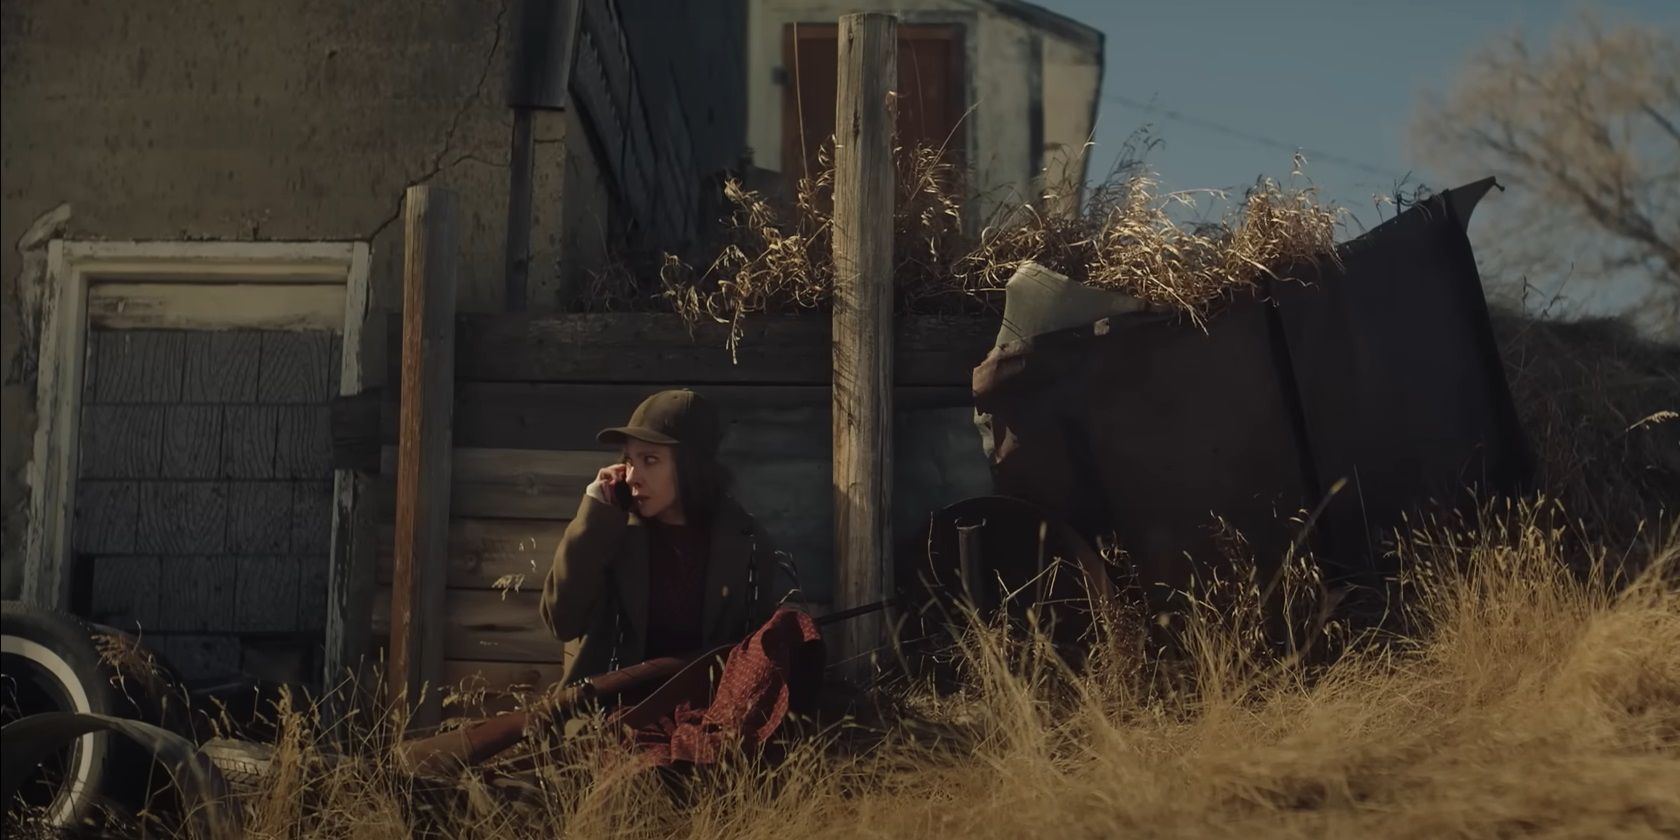 Dot hiding out on the phone in Fargo